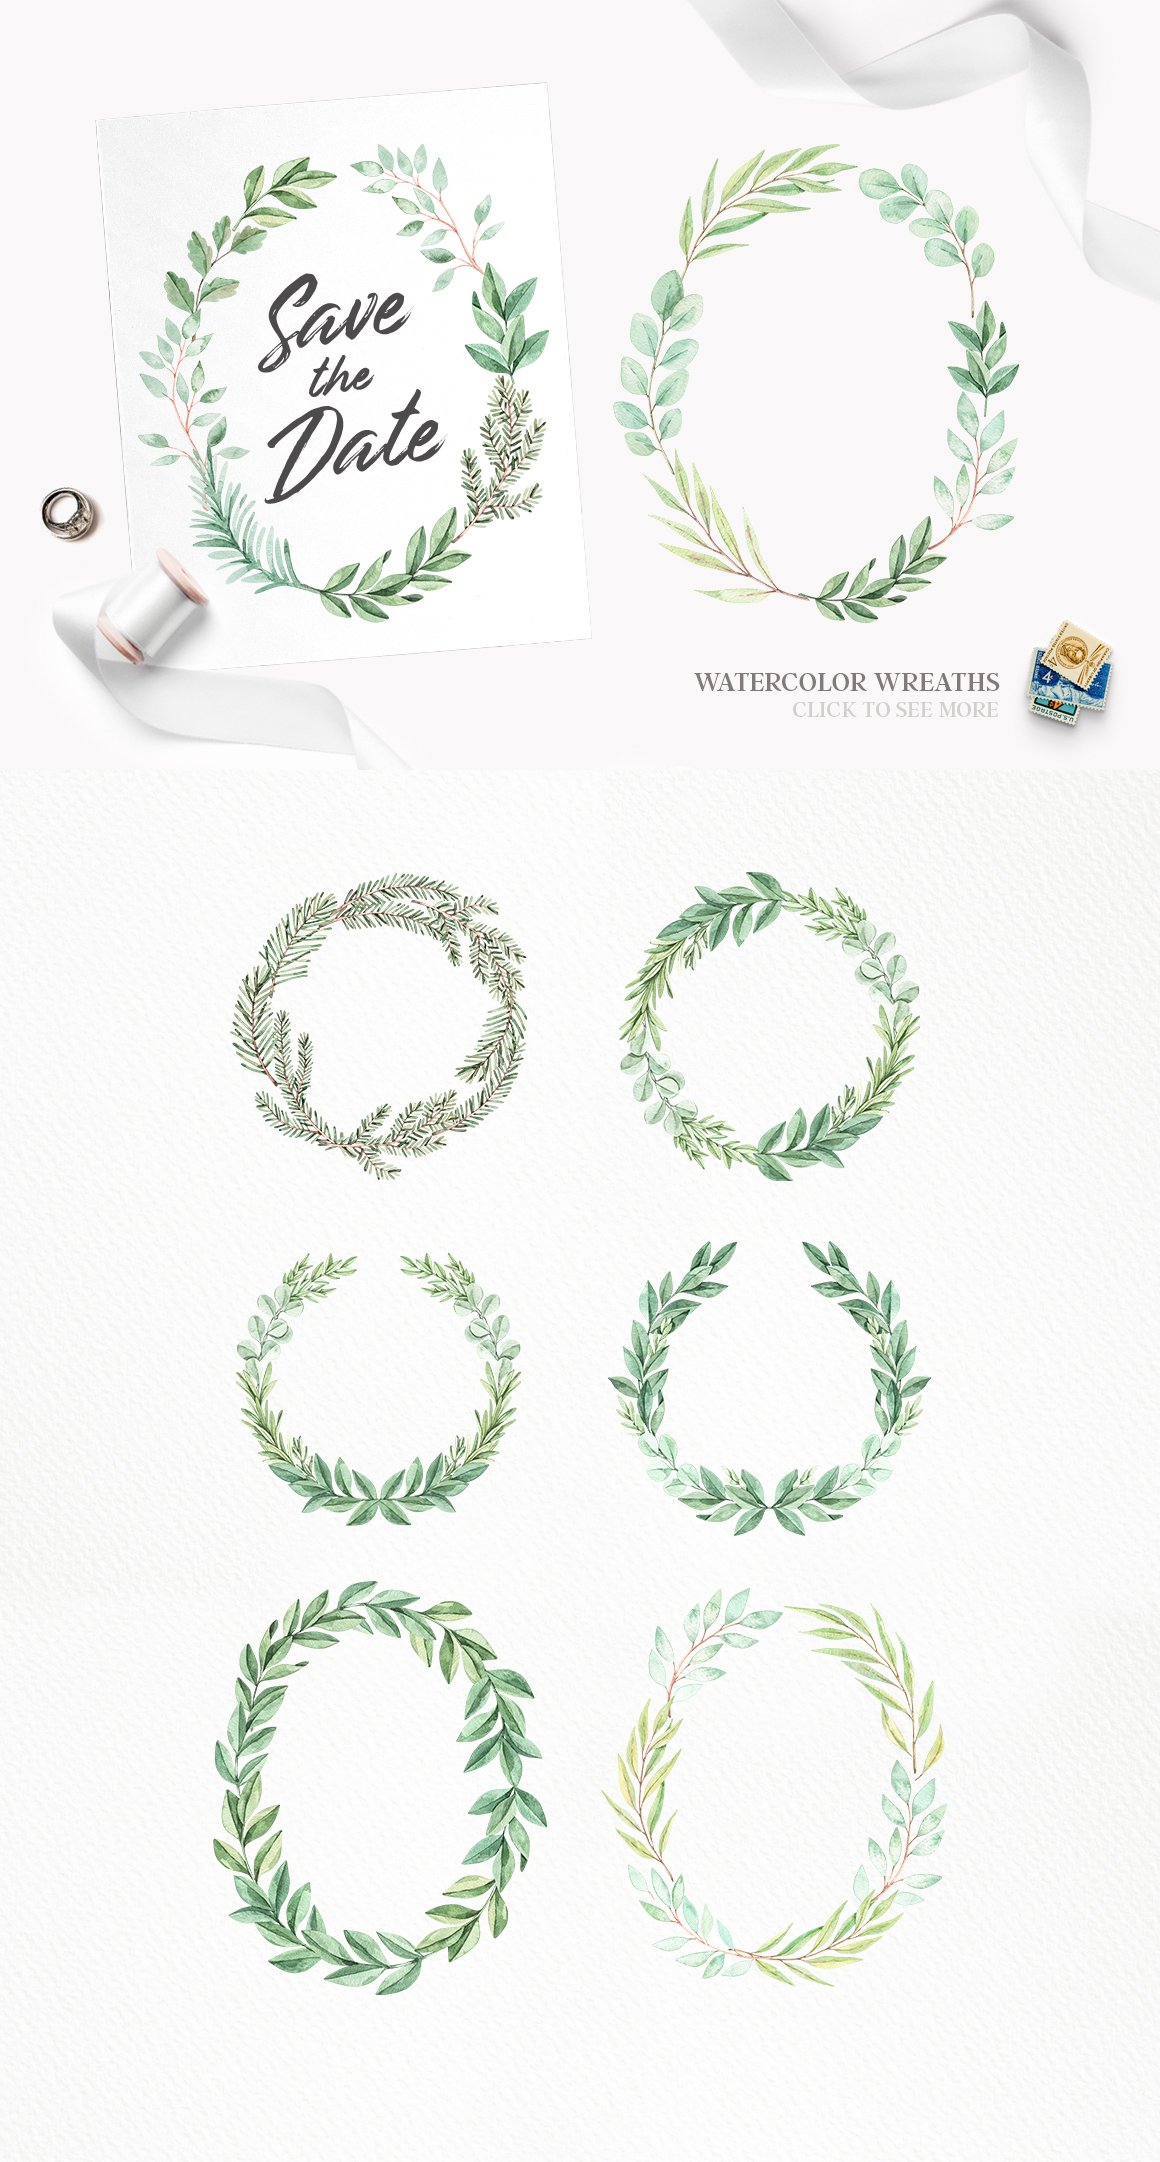 Set of watercolor wreaths and ribbons.